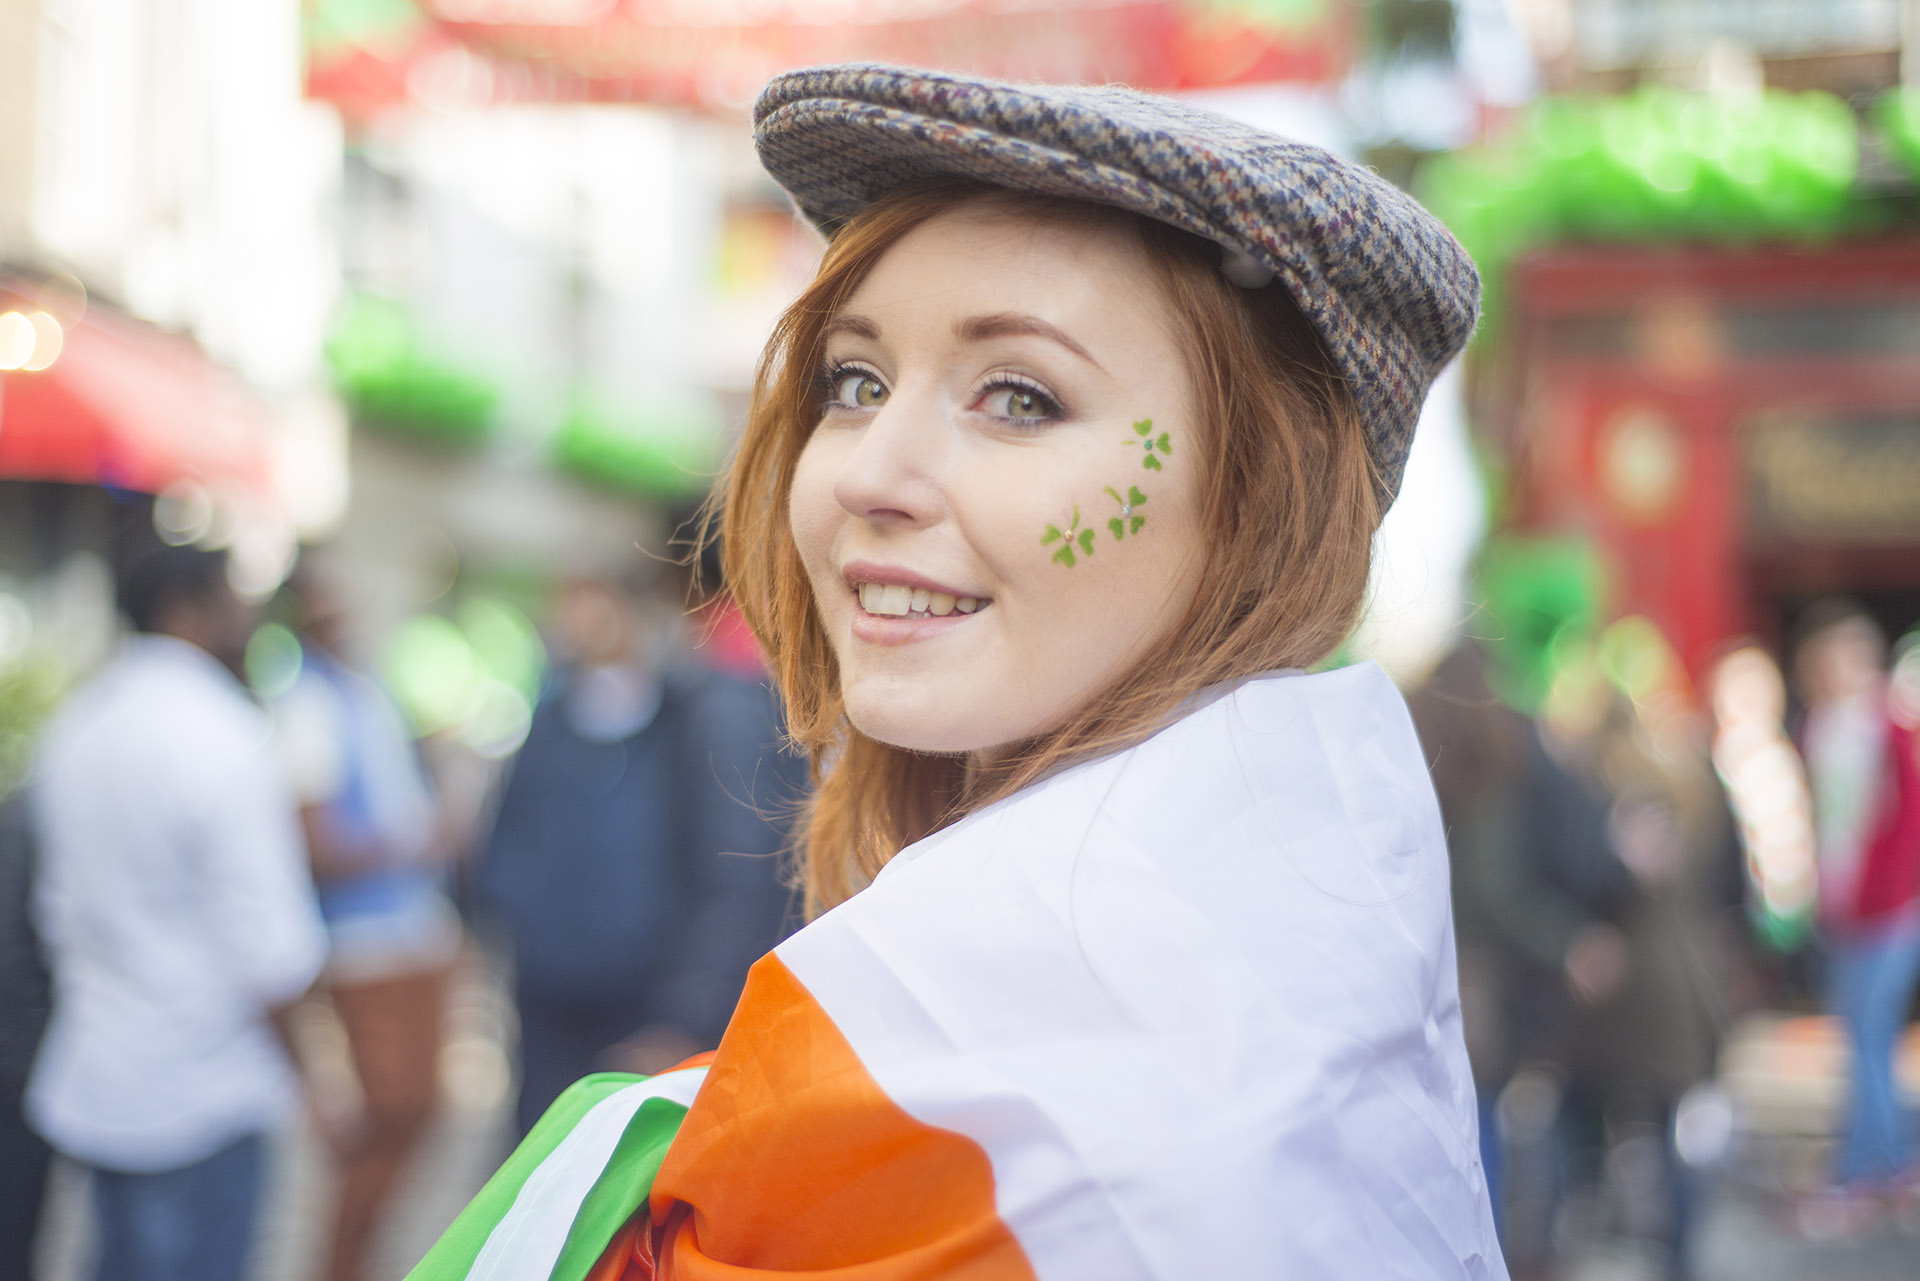 Top 3 Fun Facts about St. Patrick’s Day to Share with your Students featured image